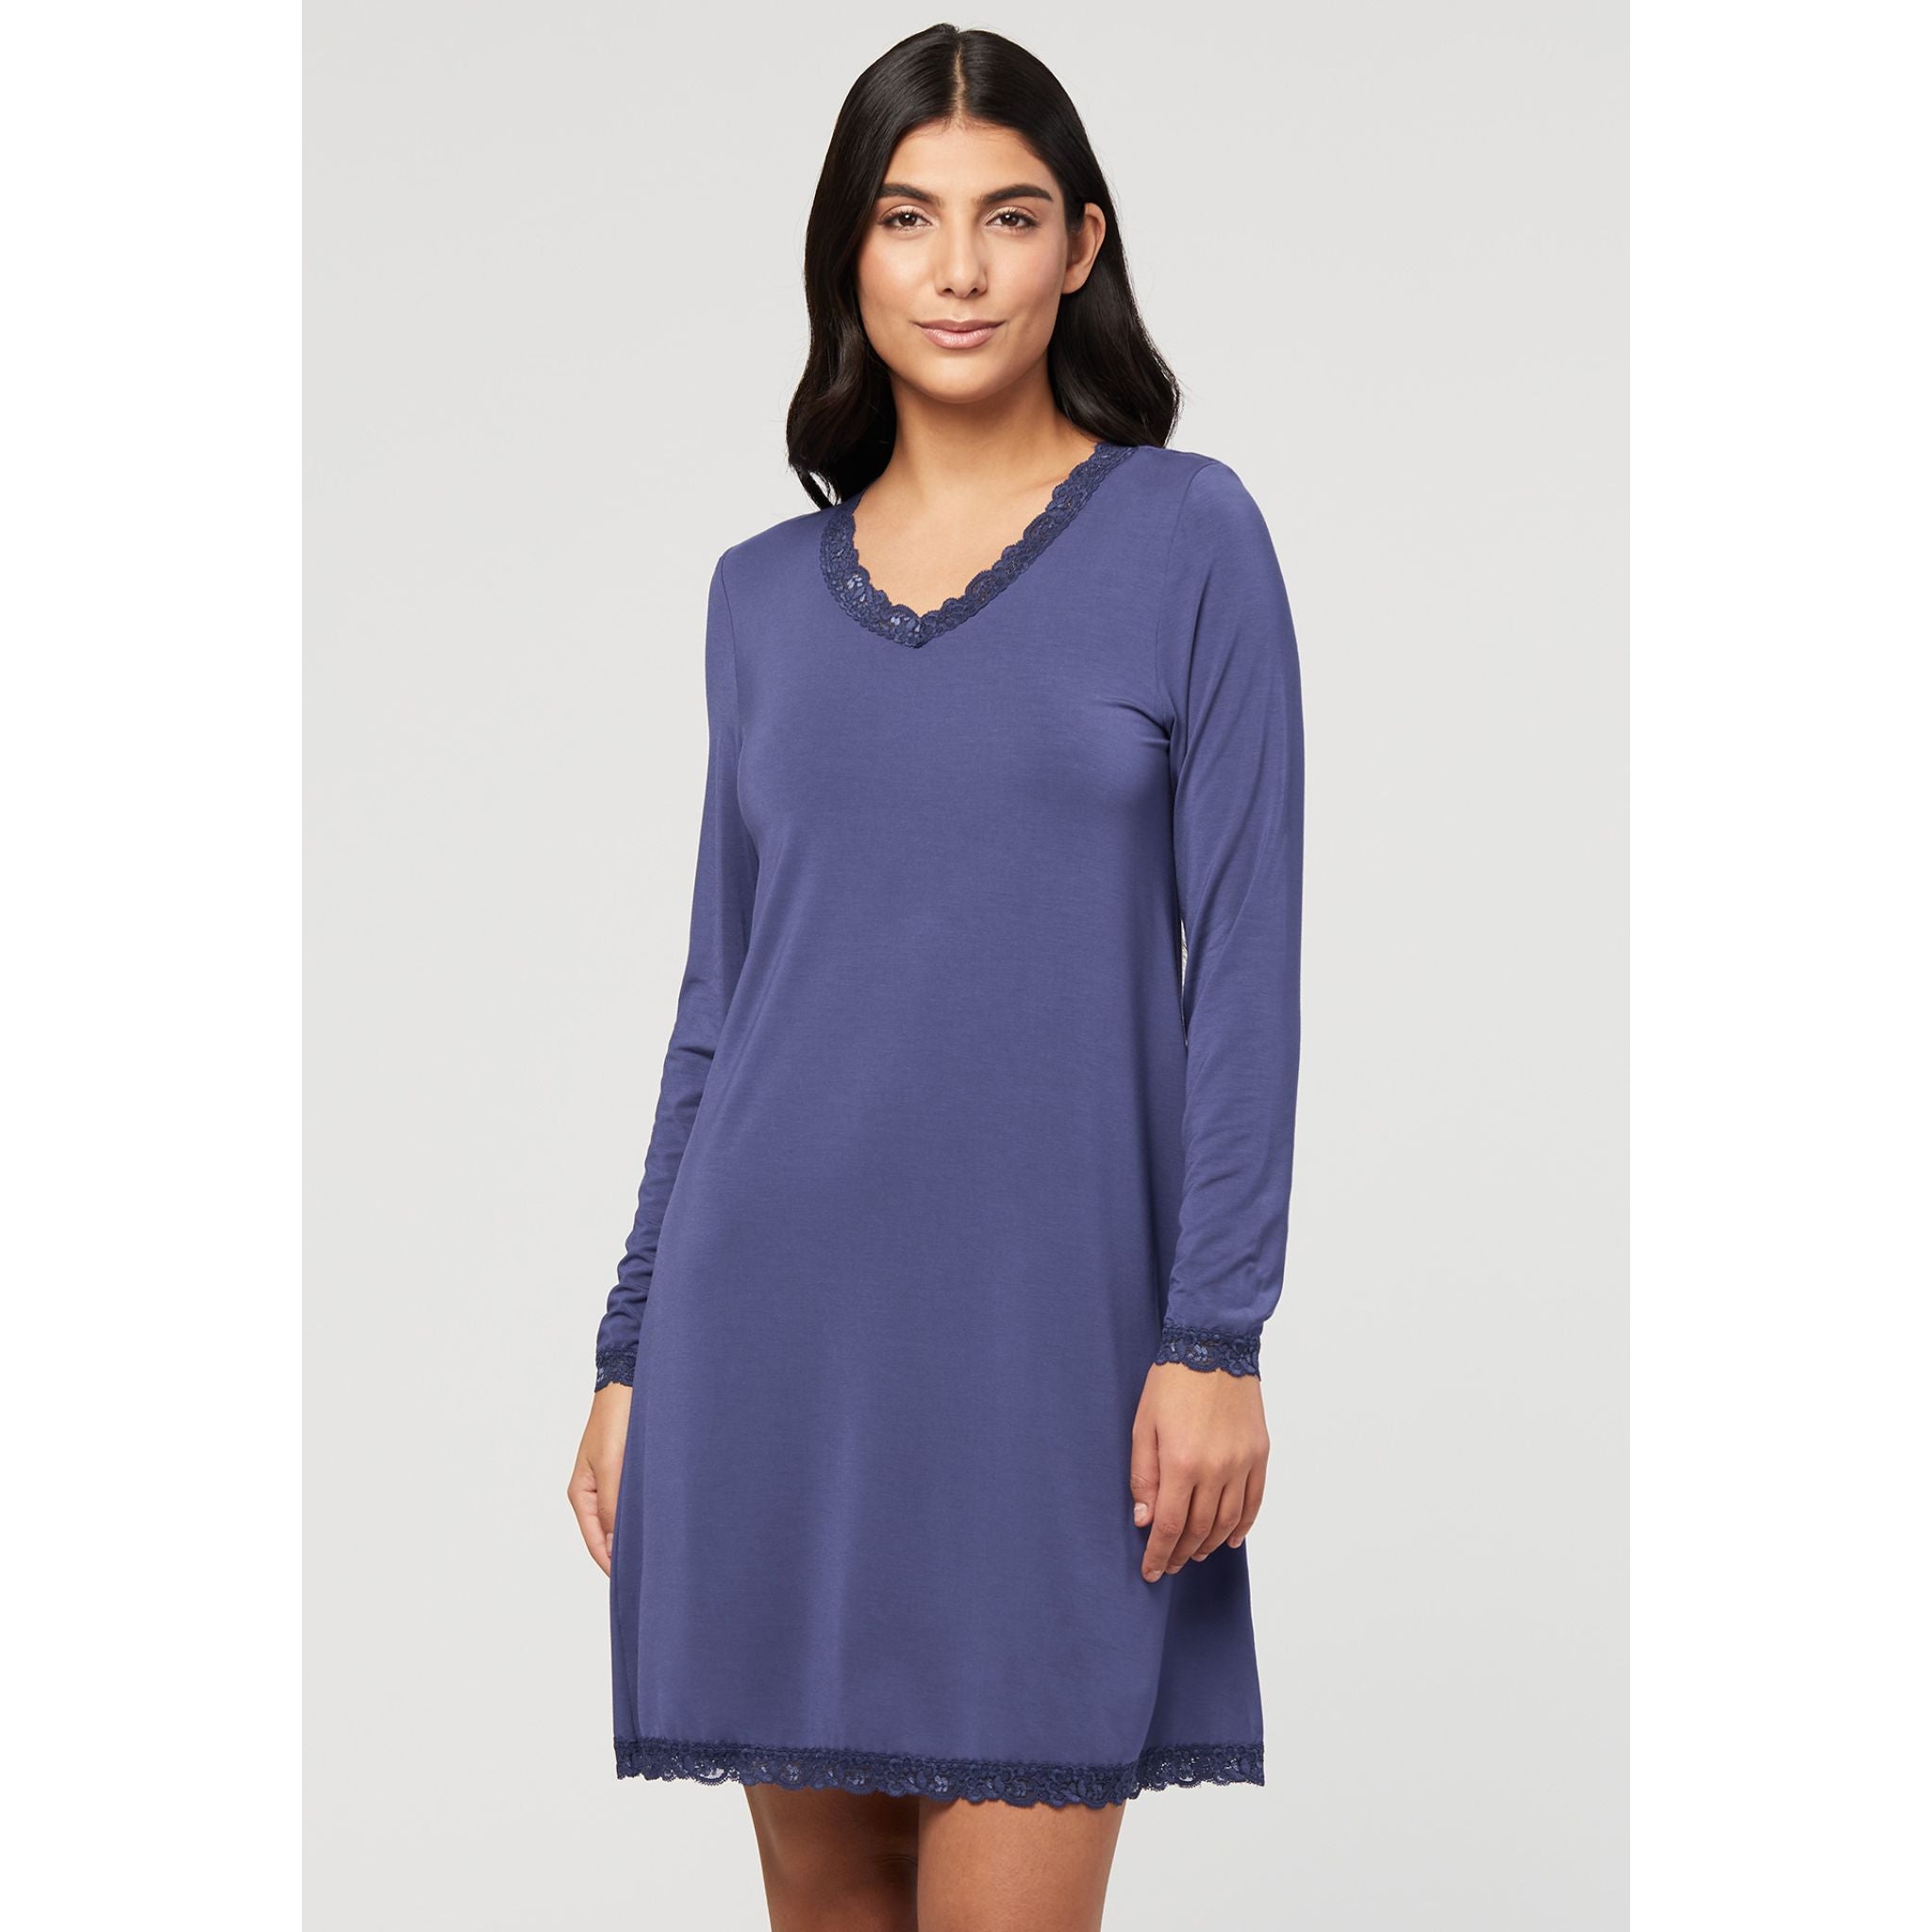 Stay cozy and look like a dream in this Modest Nightshirt, made with cloud-soft, eco-friendly TENCEL™ Modal. The style is loose fitted for your comfort and features sweet lace accents along the hemline, neckline and around the wrists for that little something sweet.